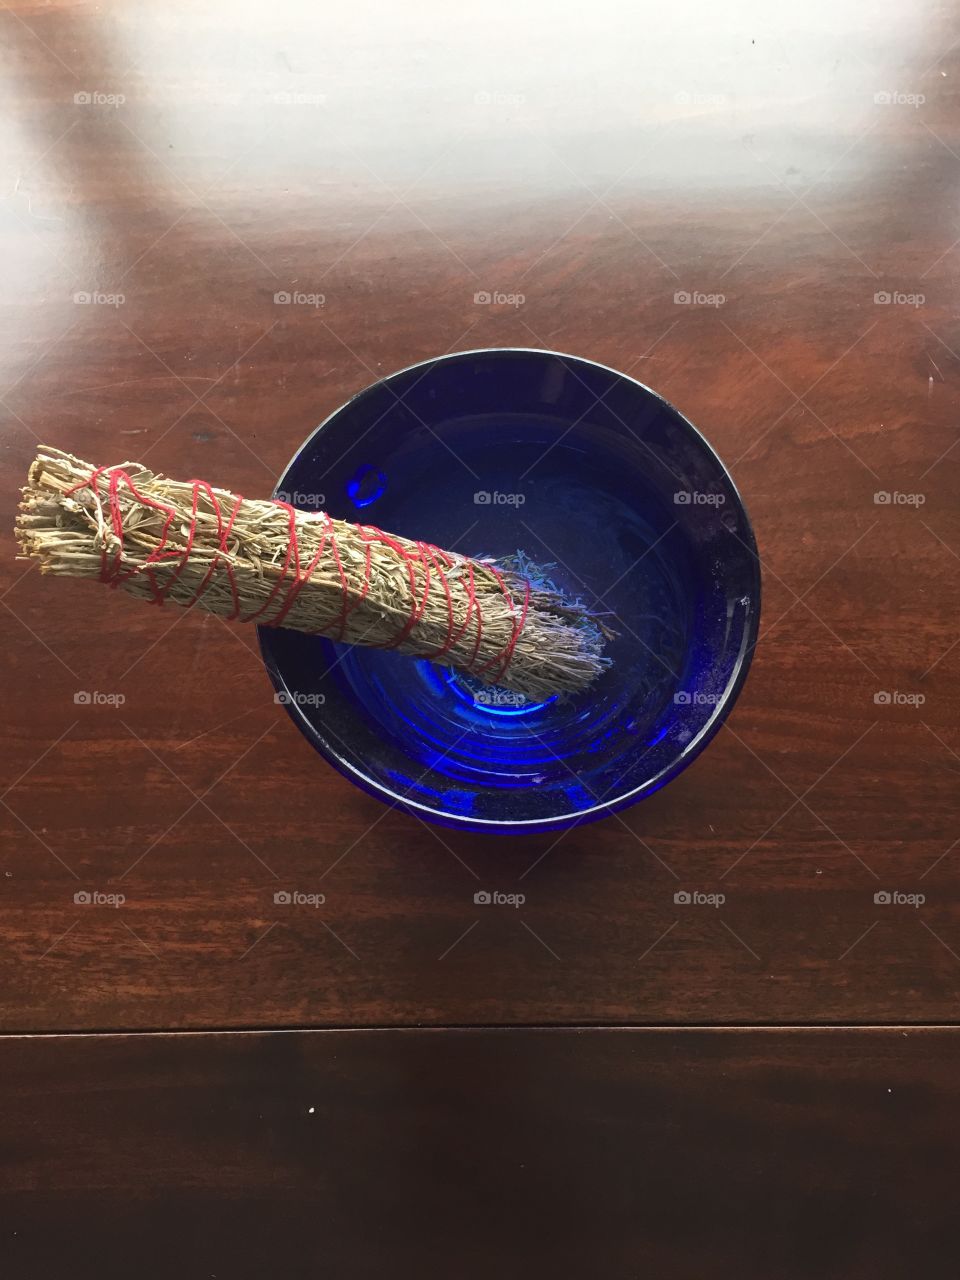 A large sage smudge sits in a blue glass bowl on a dark wood table. Morning sunlight illuminates the picture from the top.